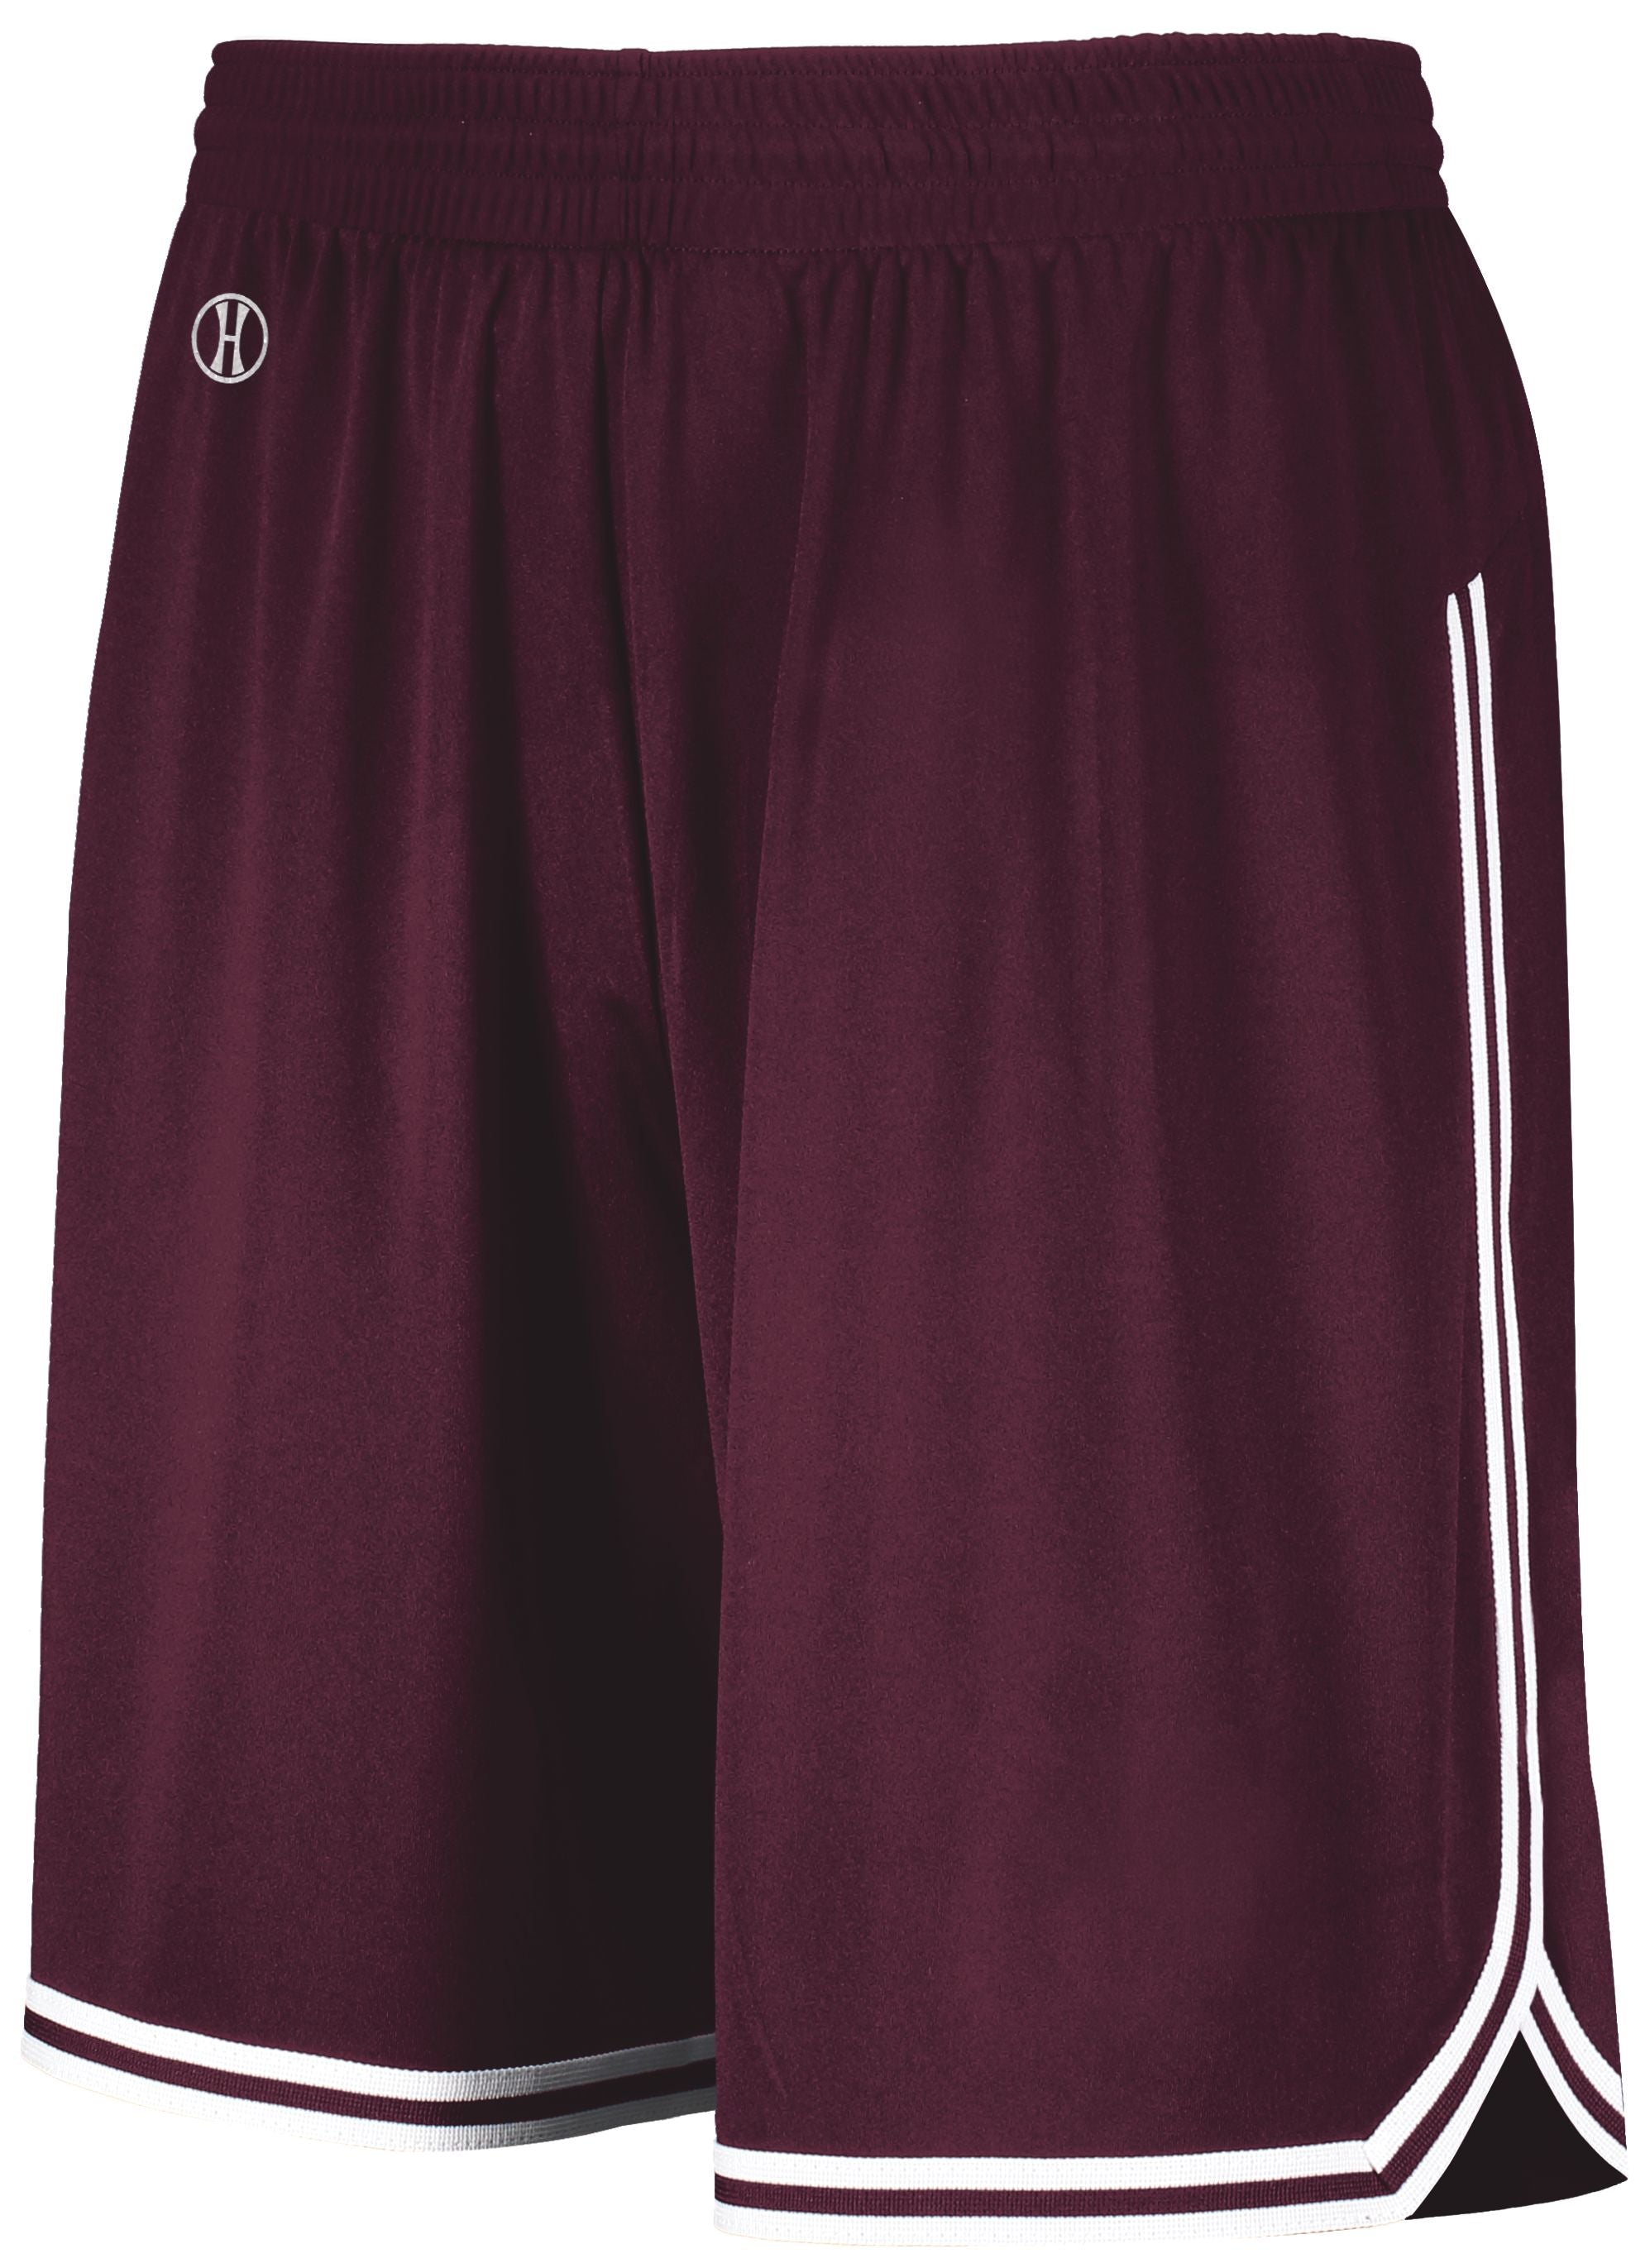 Holloway Retro Basketball Shorts in Maroon/White  -Part of the Adult, Adult-Shorts, Basketball, Holloway, All-Sports, All-Sports-1 product lines at KanaleyCreations.com